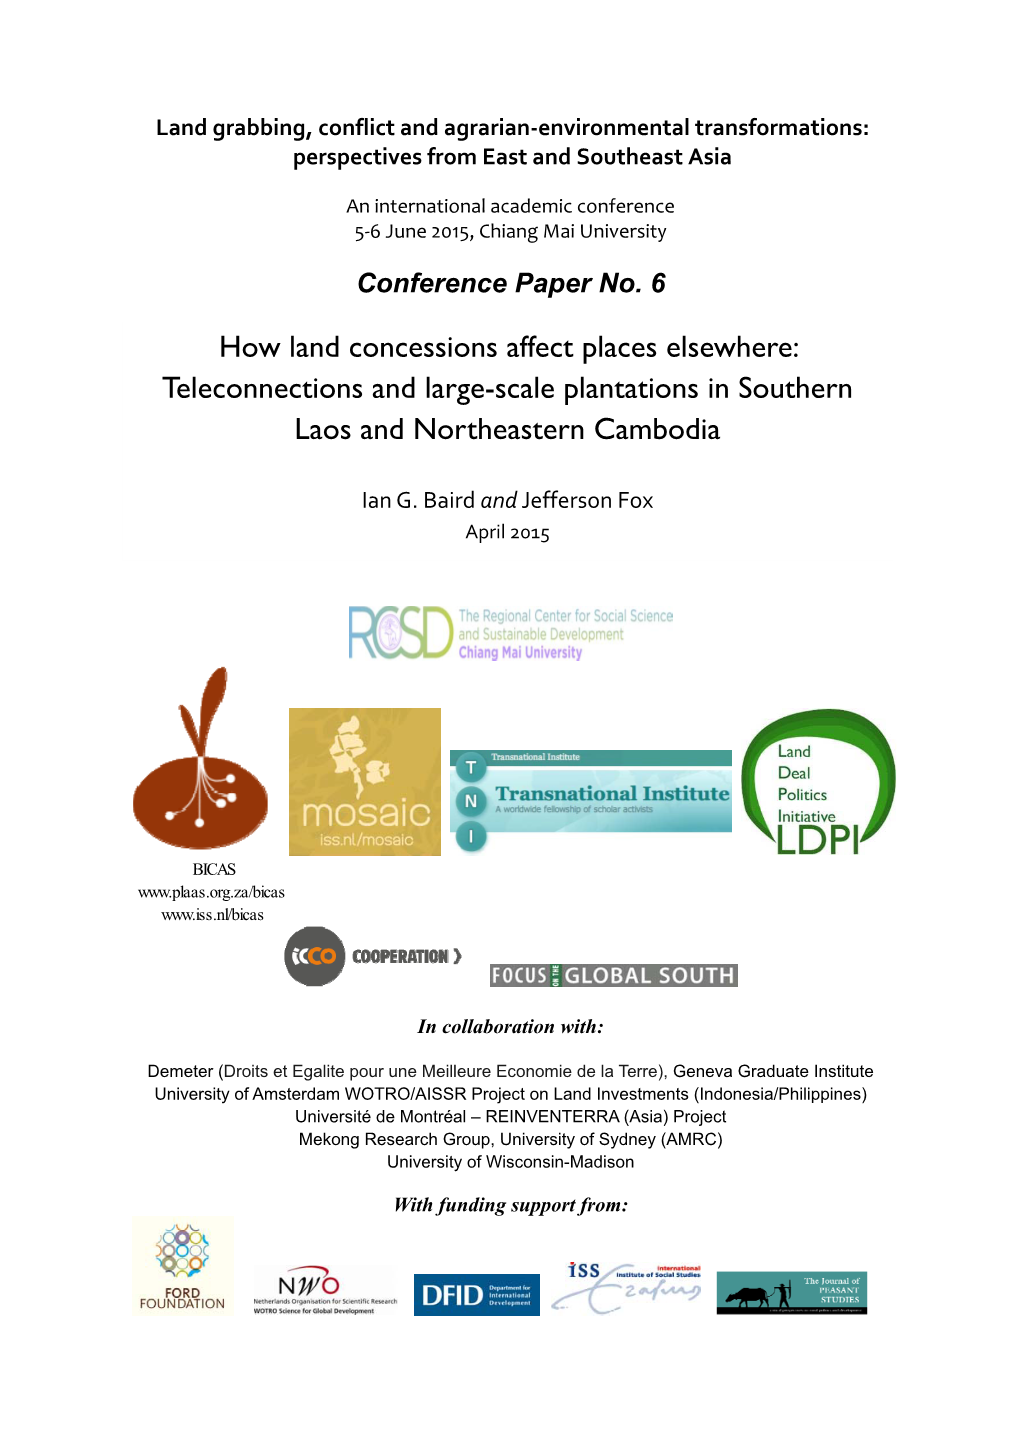 How Land Concessions Affect Places Elsewhere: Teleconnections and Large-Scale Plantations in Southern Laos and Northeastern Cambodia